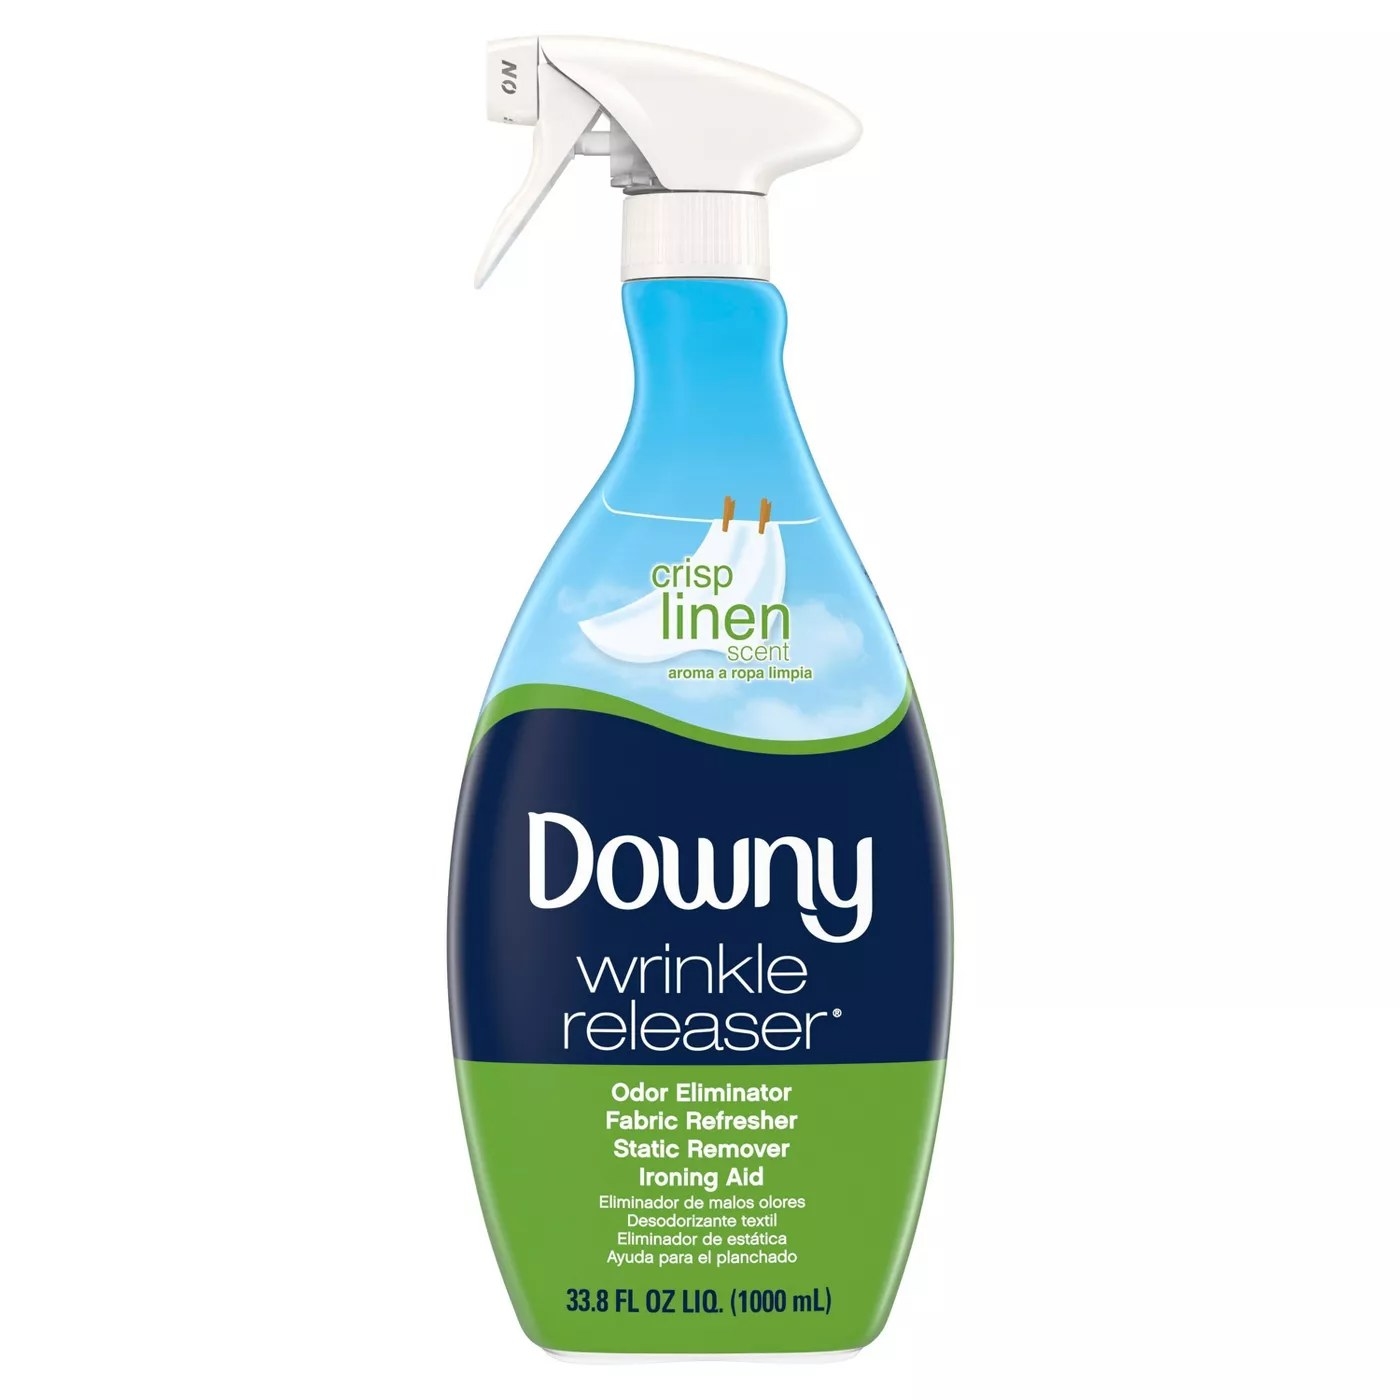 A close-up of the Downy bottle